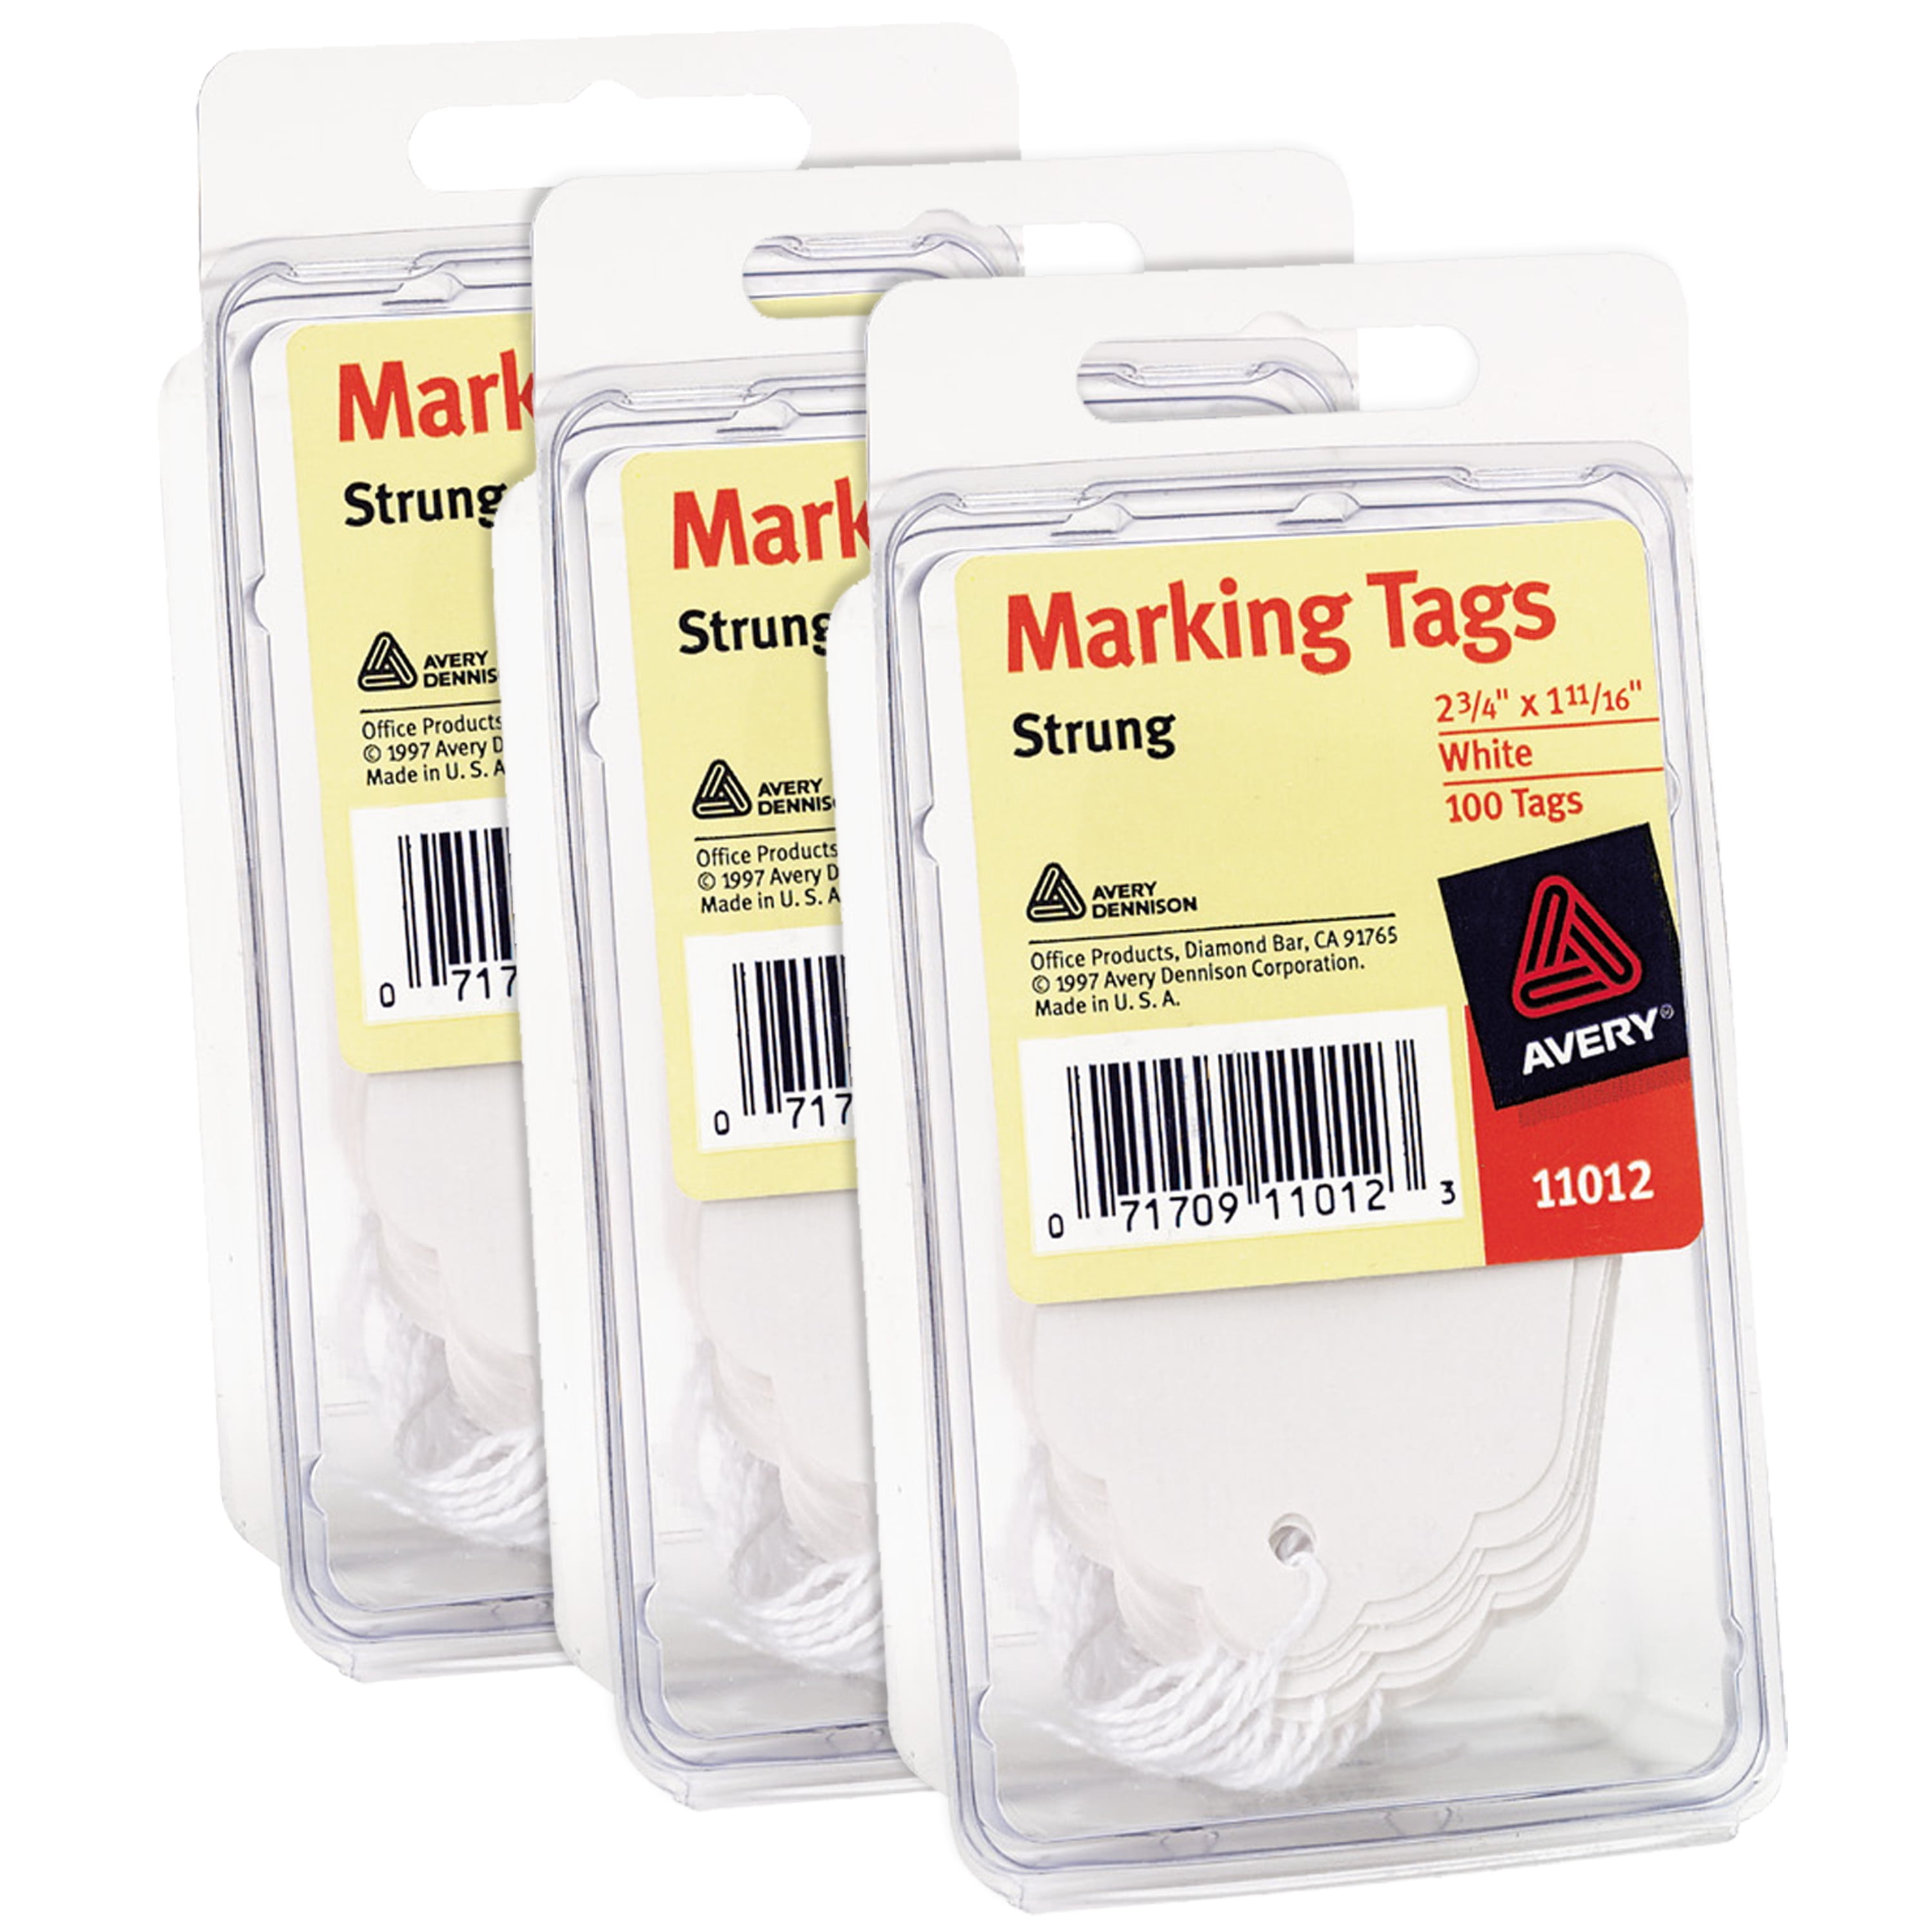 NR 300 Strung White Price Tags With String #3 